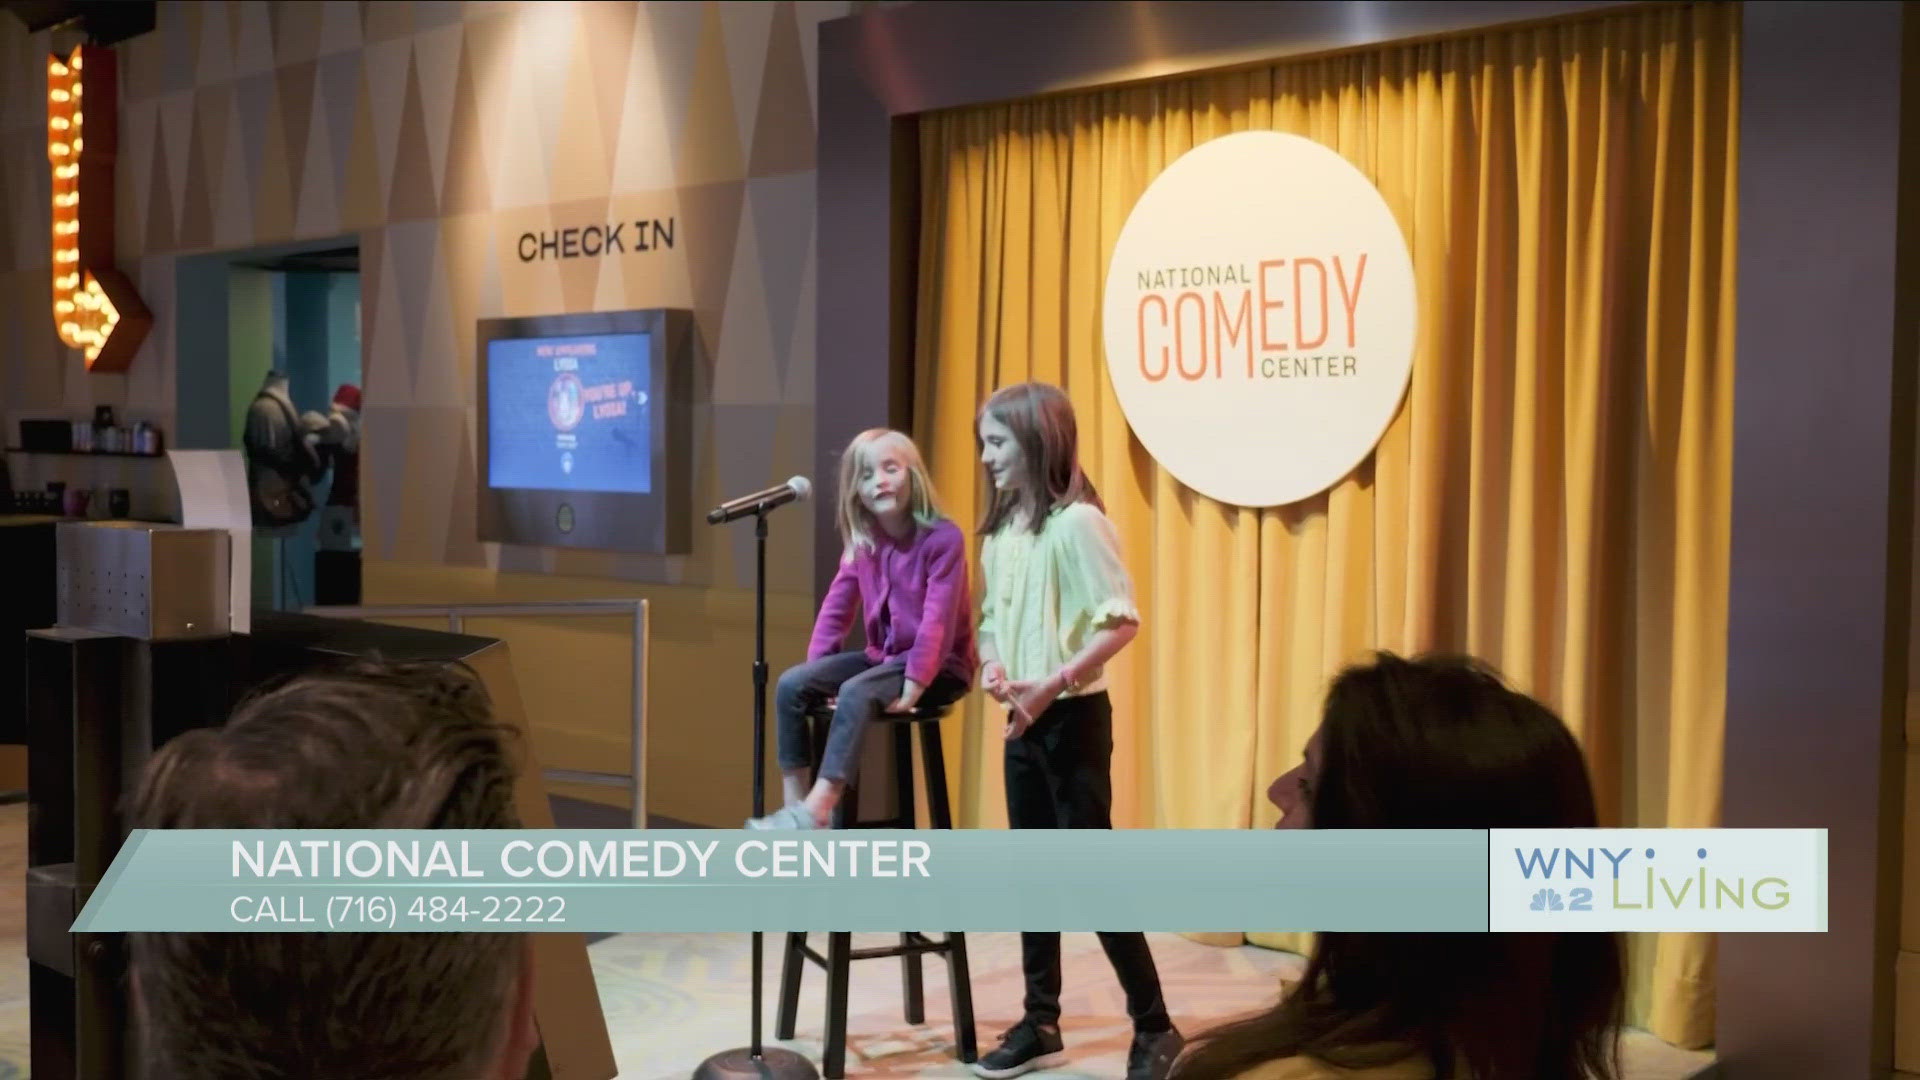 Sat 6/22 - The National Comedy Center (THIS VIDEO IS SPONSORED BY THE NATIONAL COMEDY CENTER)